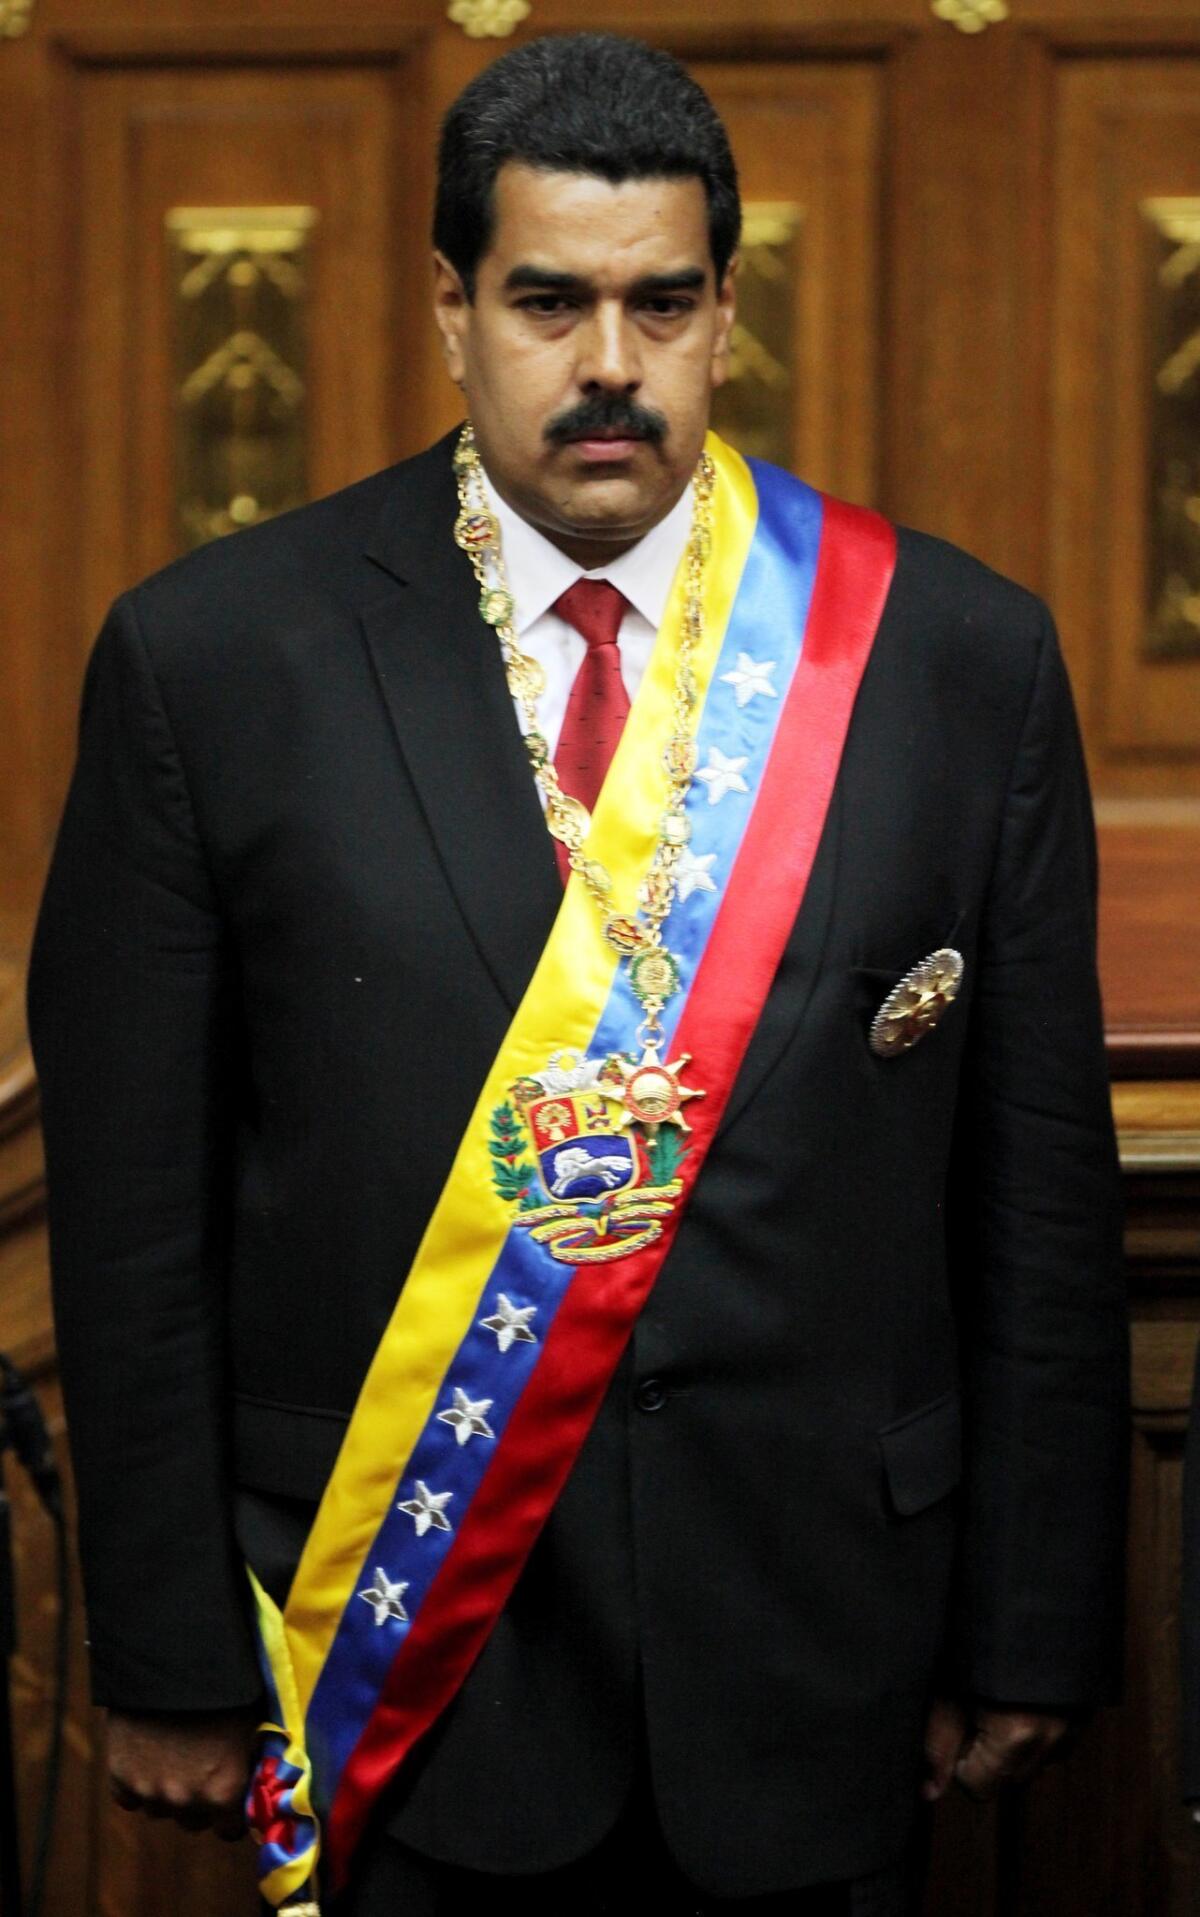 Venezuela's newly sworn-in President Nicolas Maduro pauses during the singing of the national anthem in the National Assembly in Caracas on Friday.